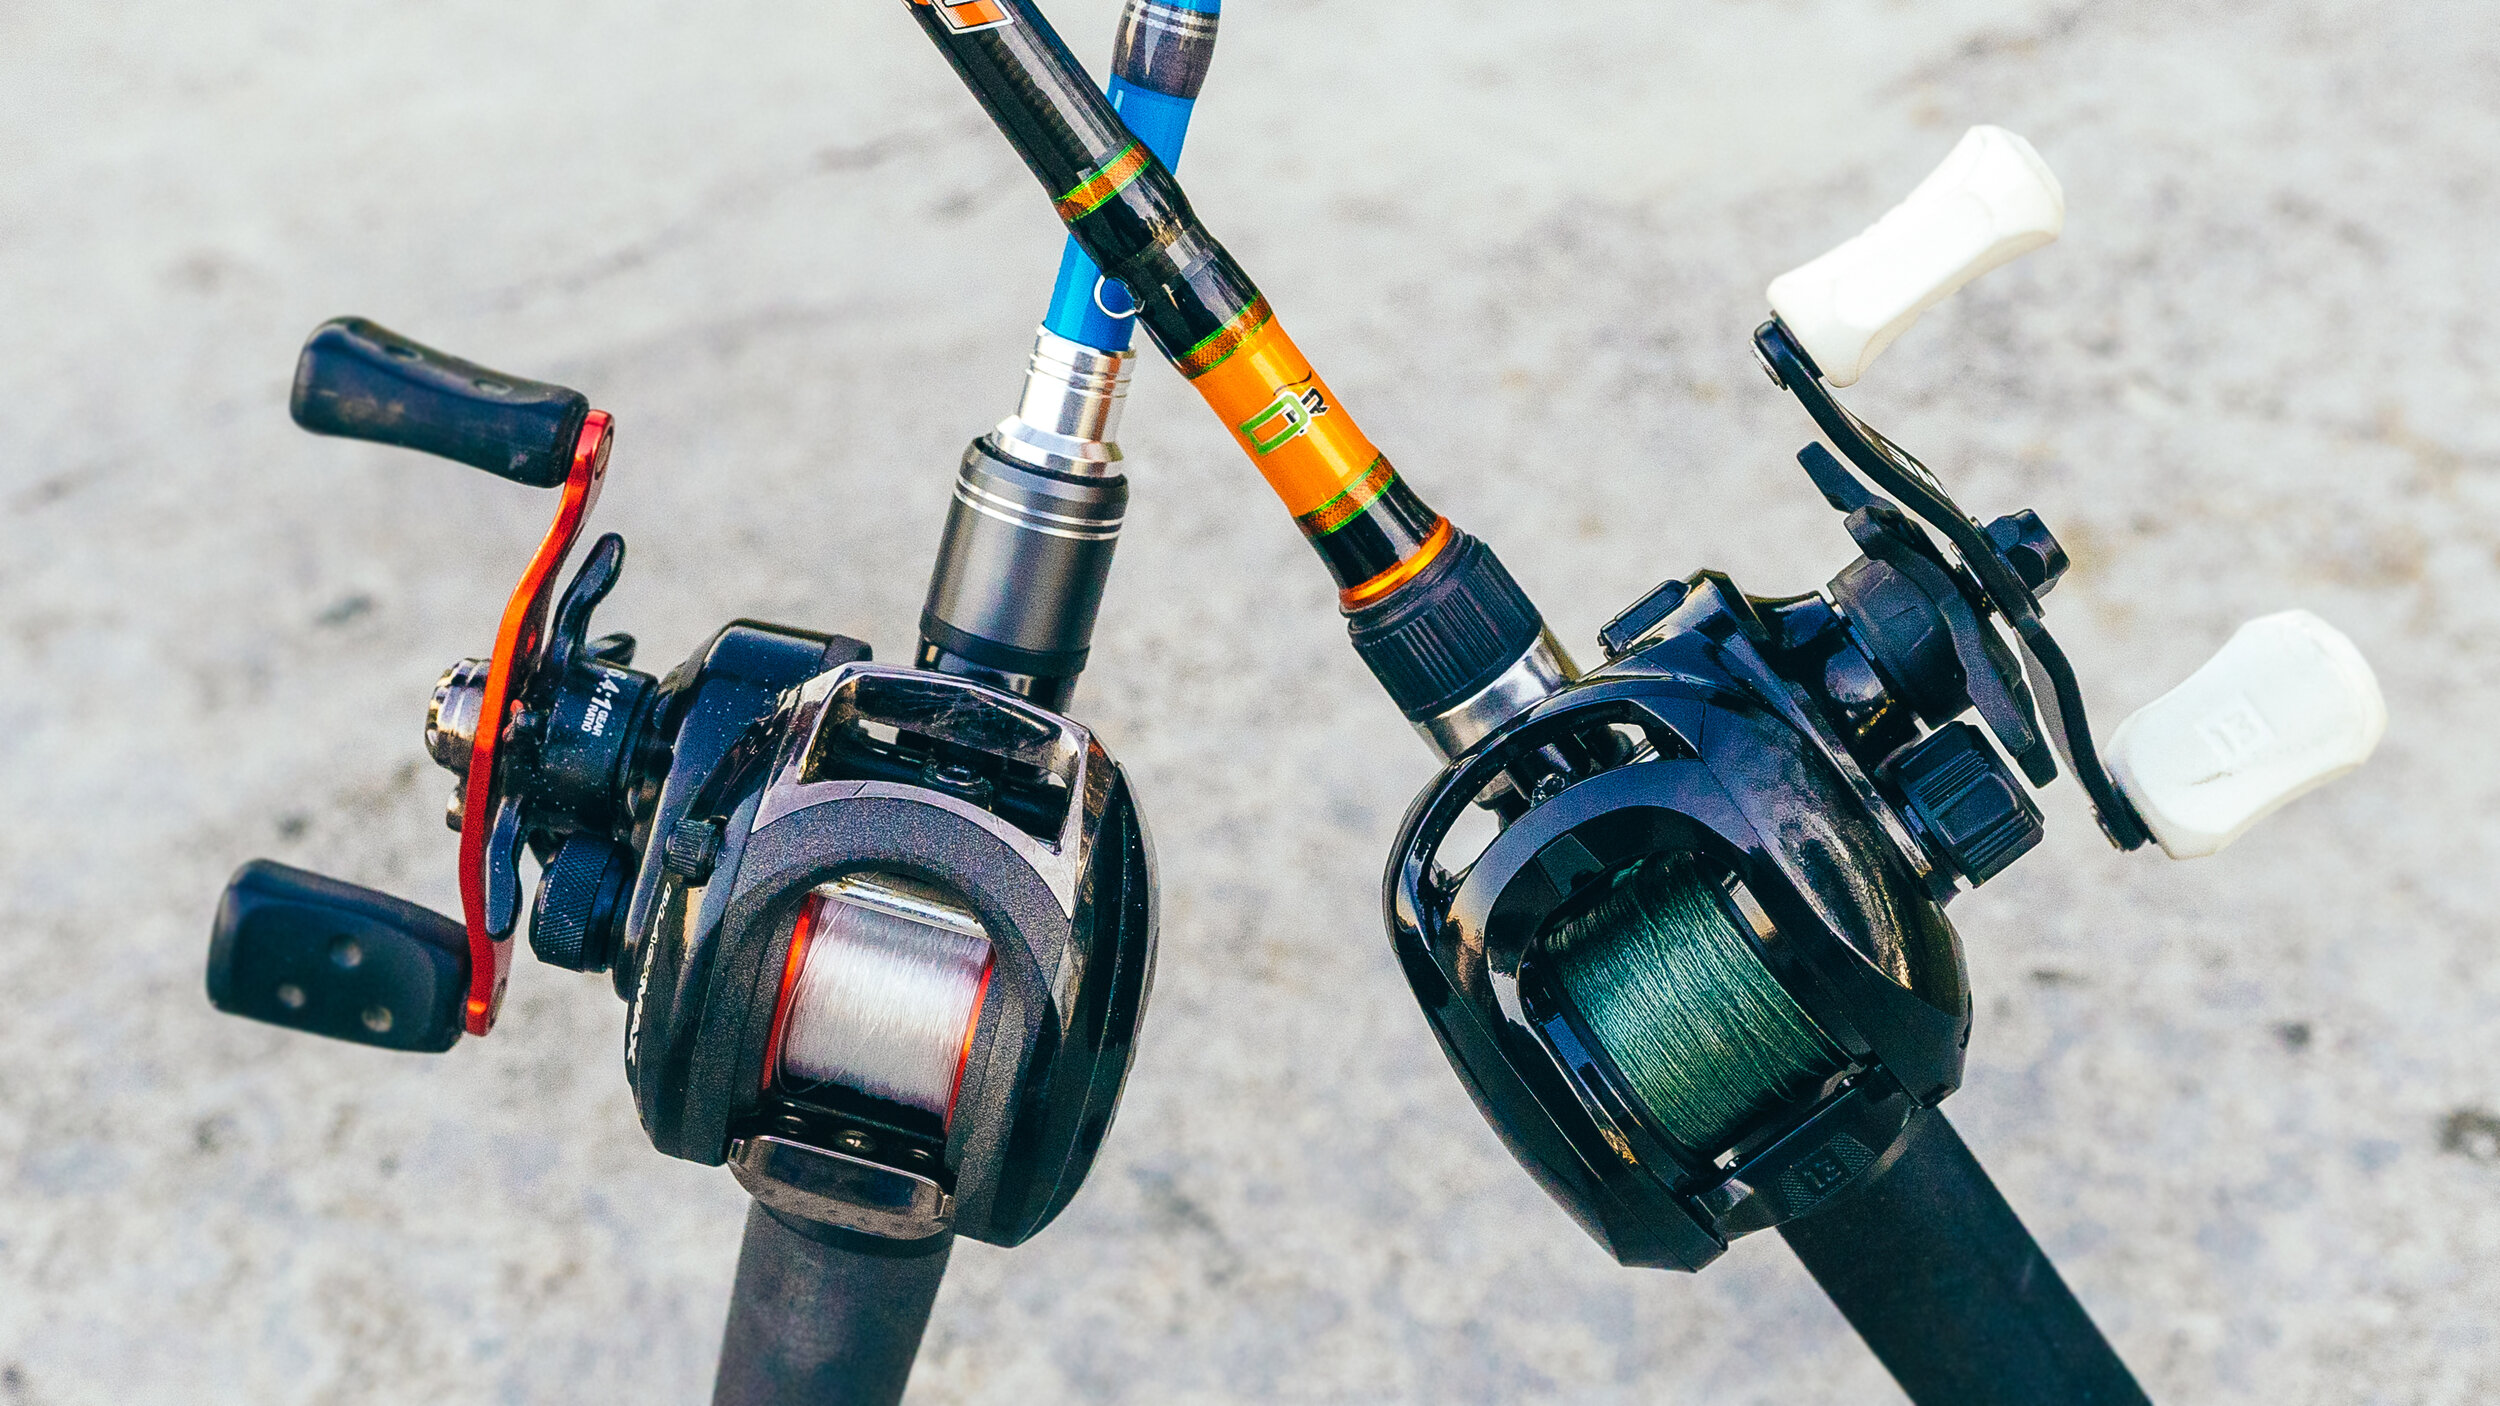 BUYER'S GUIDE: $100 ROD AND REEL COMBOS 